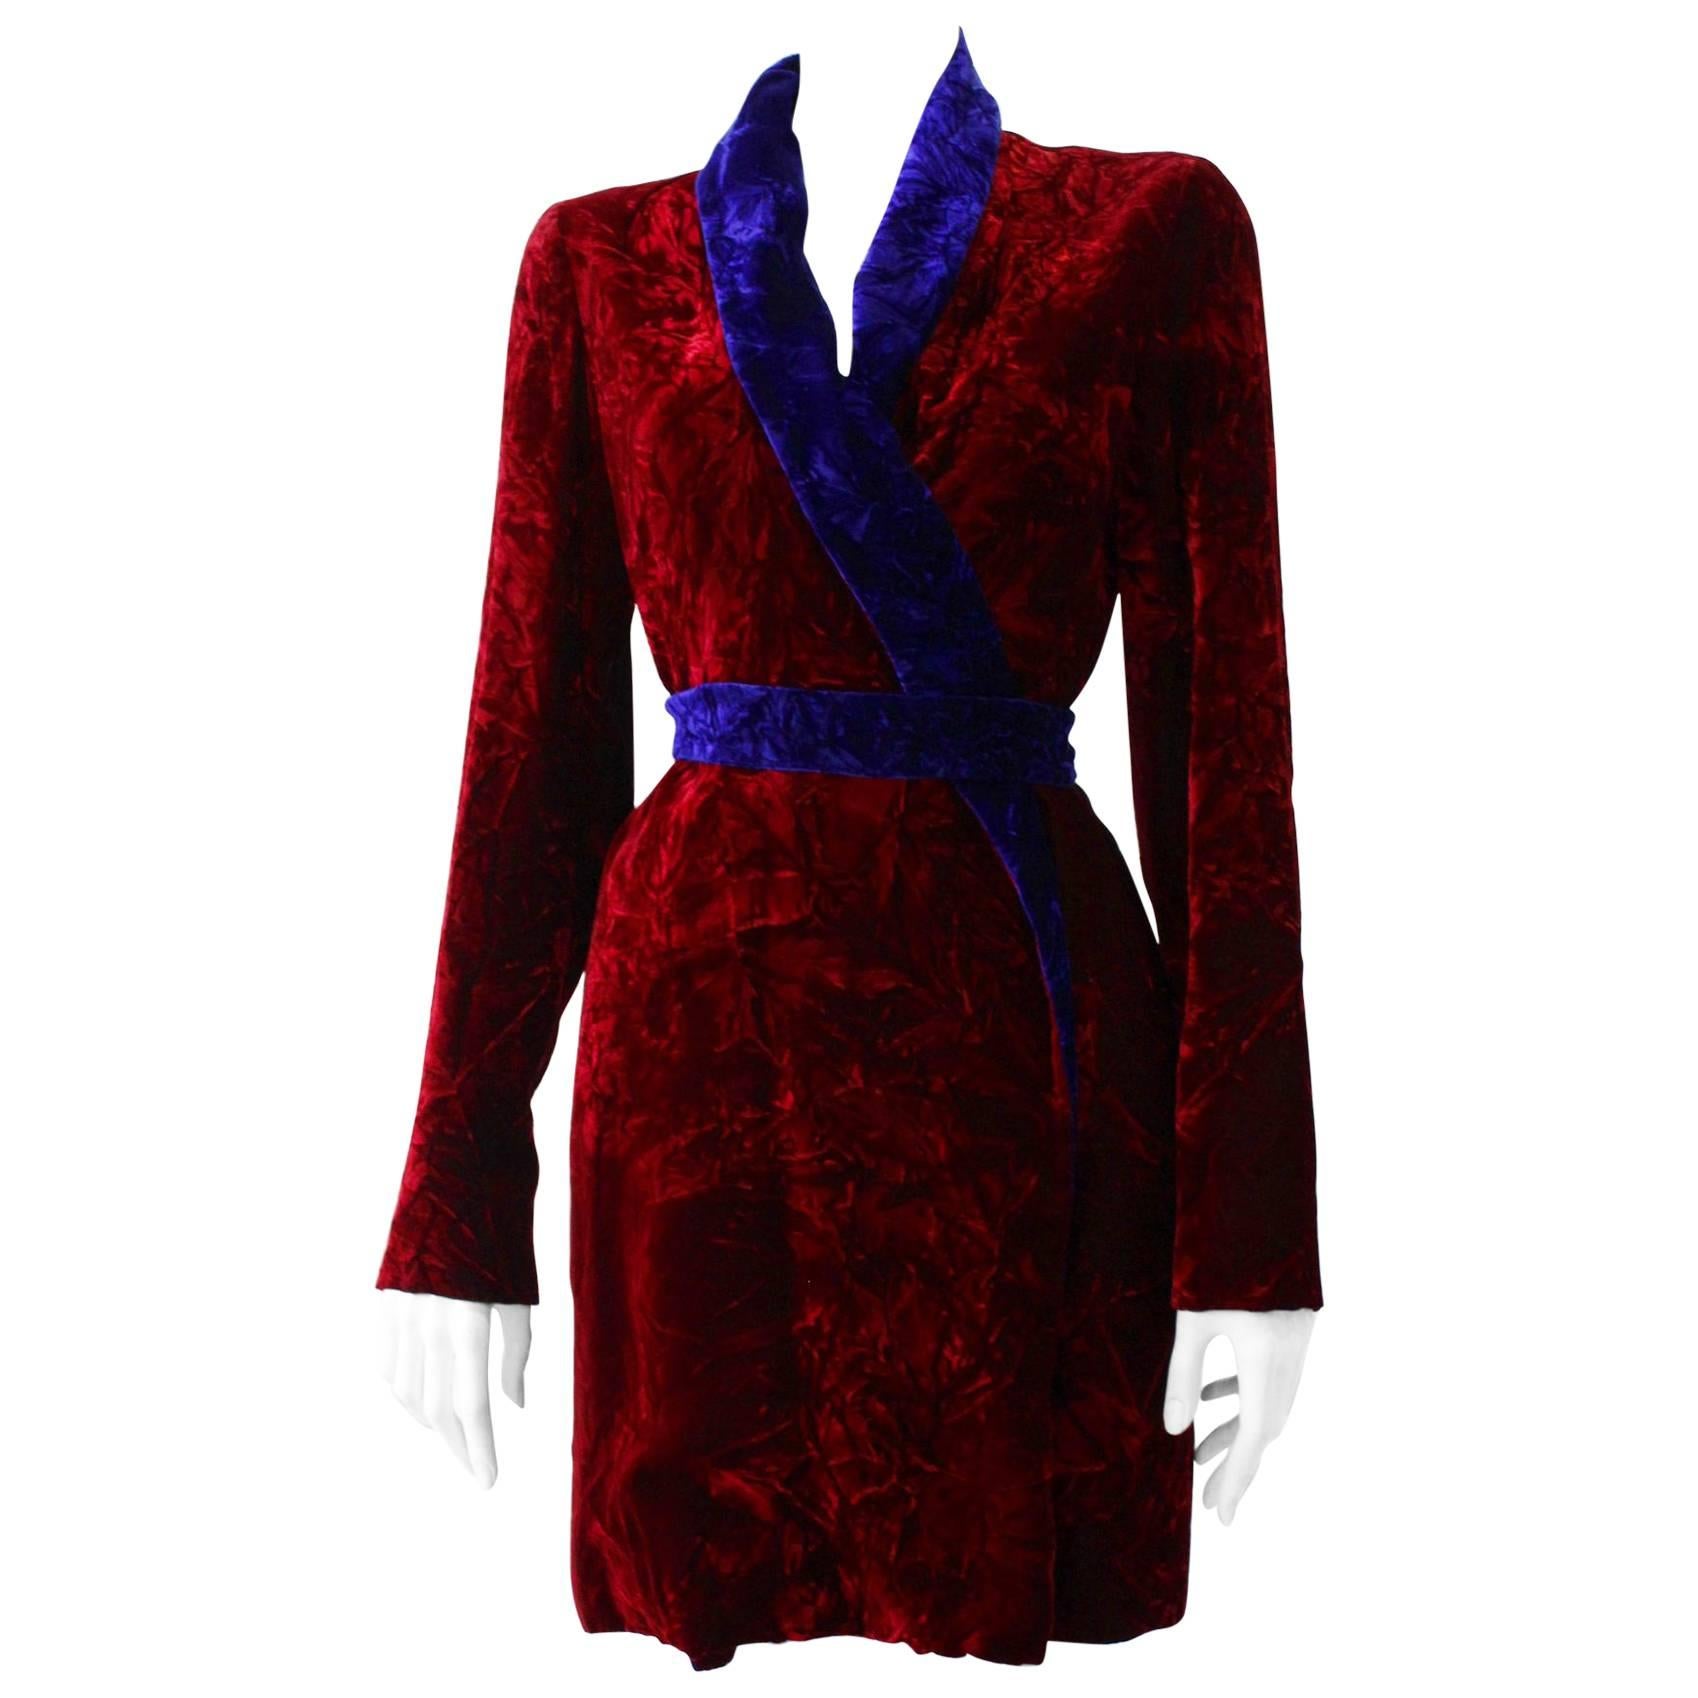 Istante By Gianni Versace Crushed Velvet Evening Coat Fall/Winter 1997 For Sale